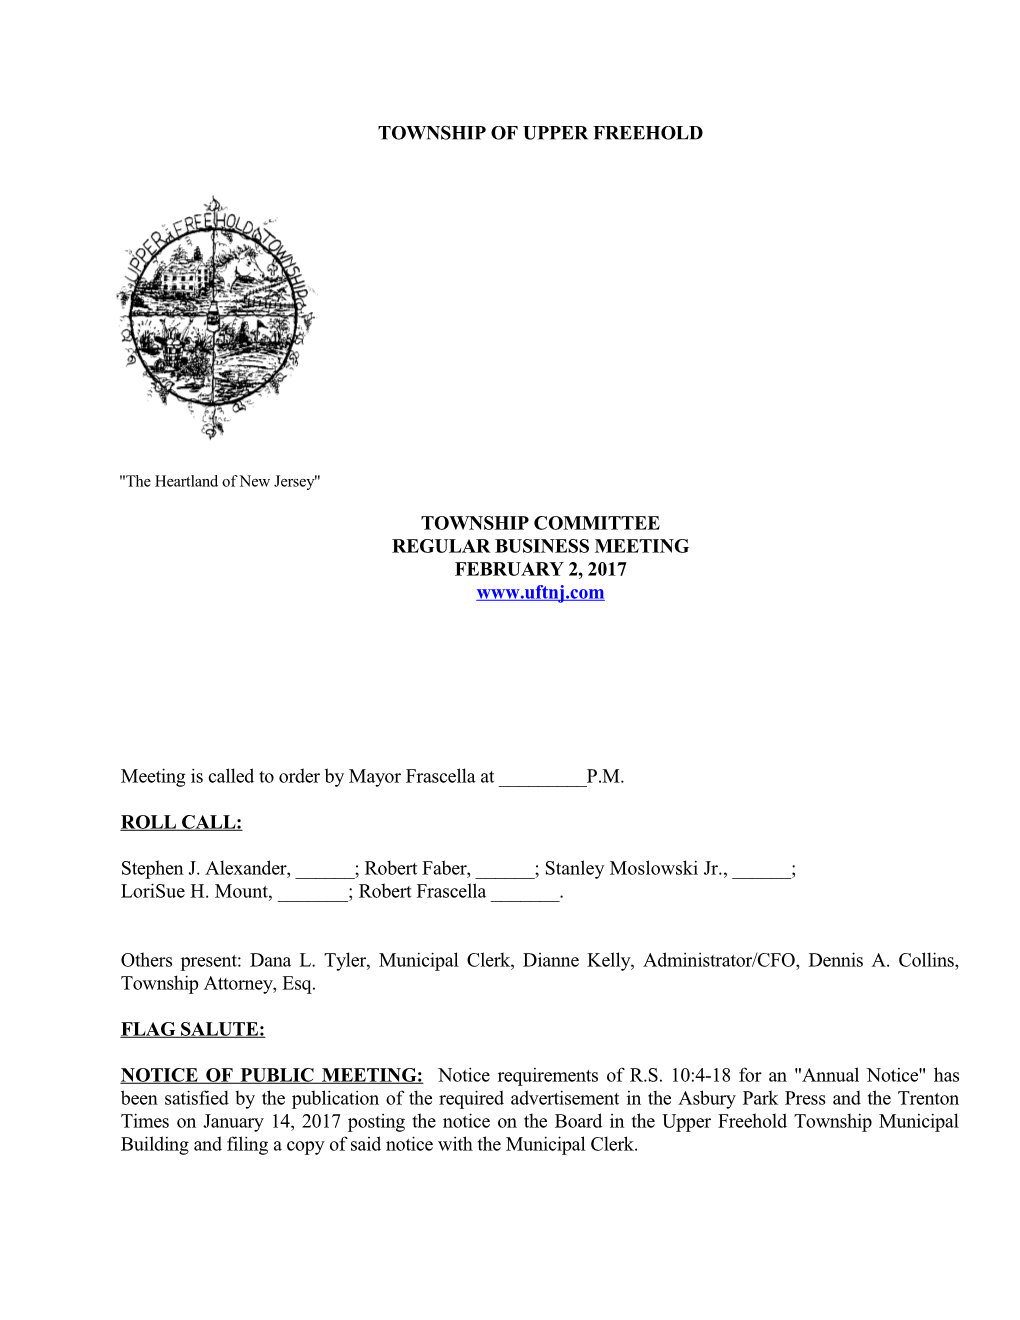 Upper Freehold Township Committee Regular Meeting February 2, 2017